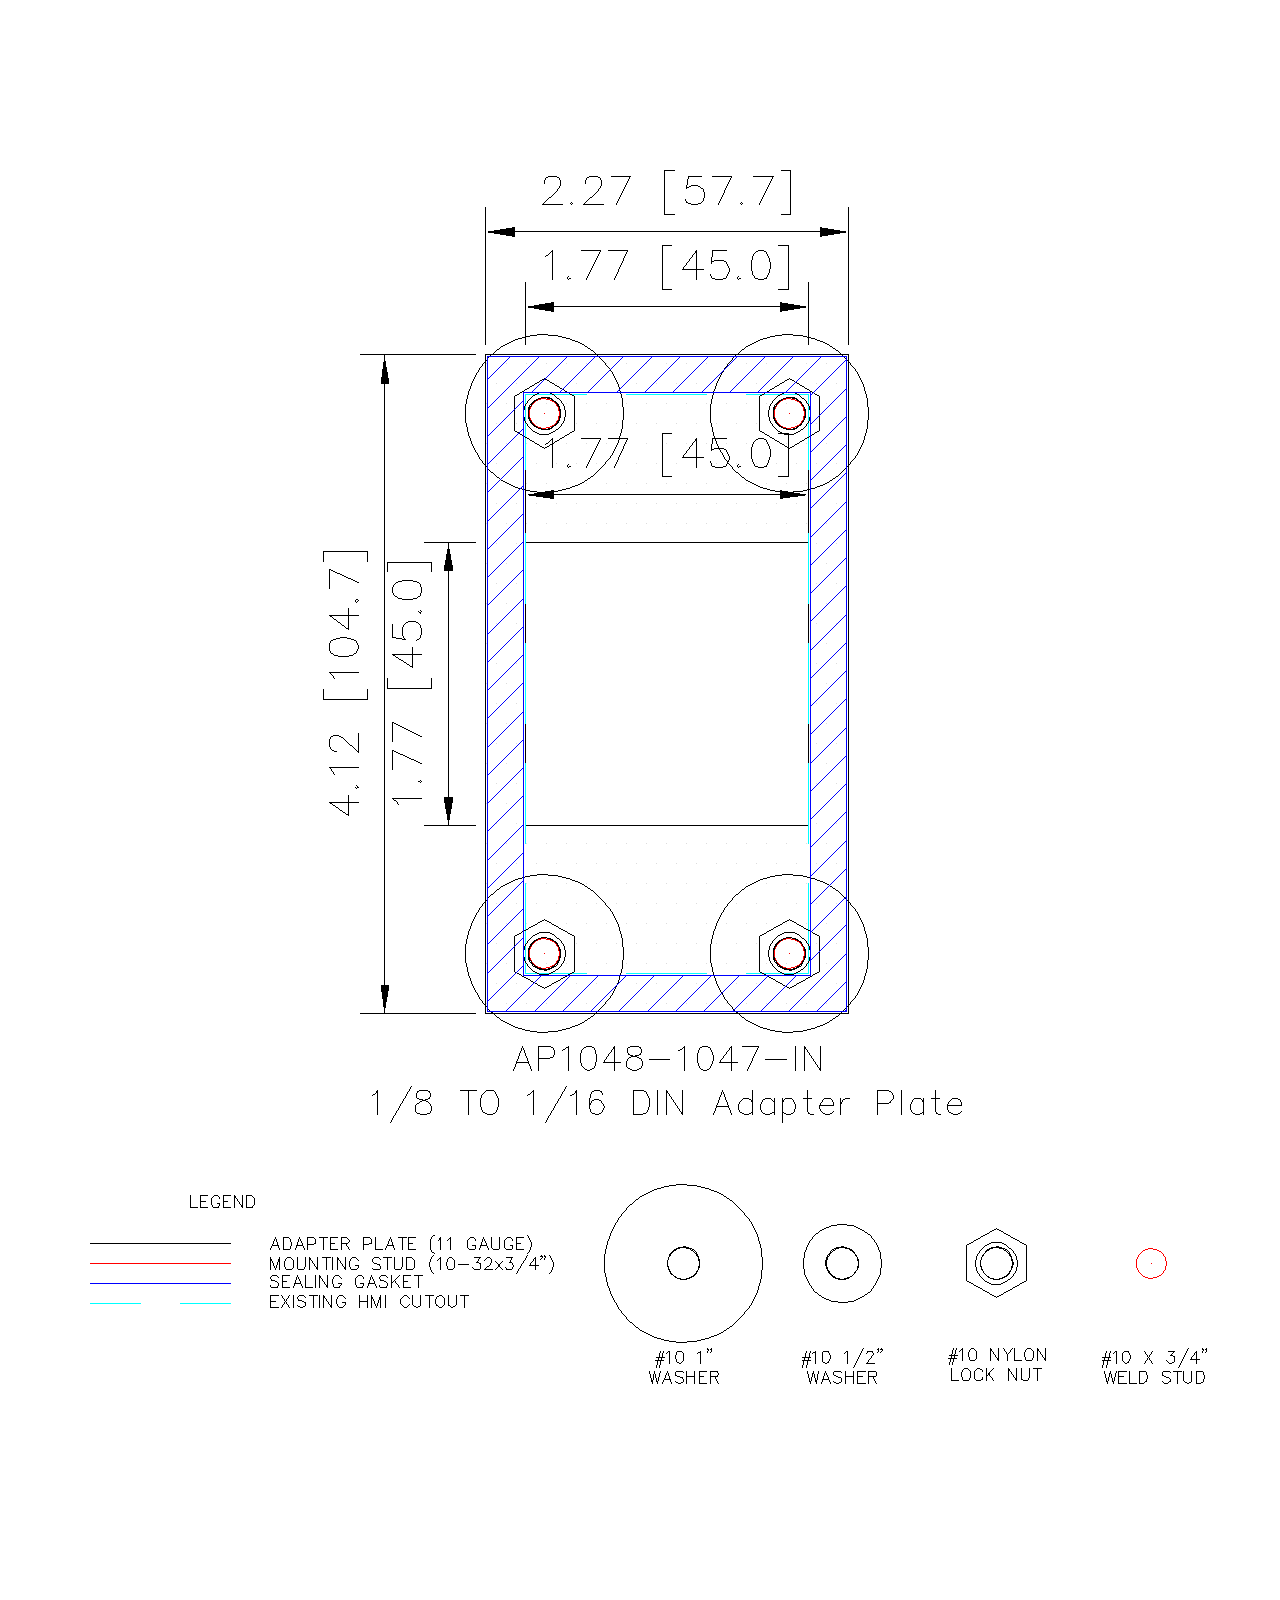 Adapter Plate - 1/8 DIN to 1/16 DIN